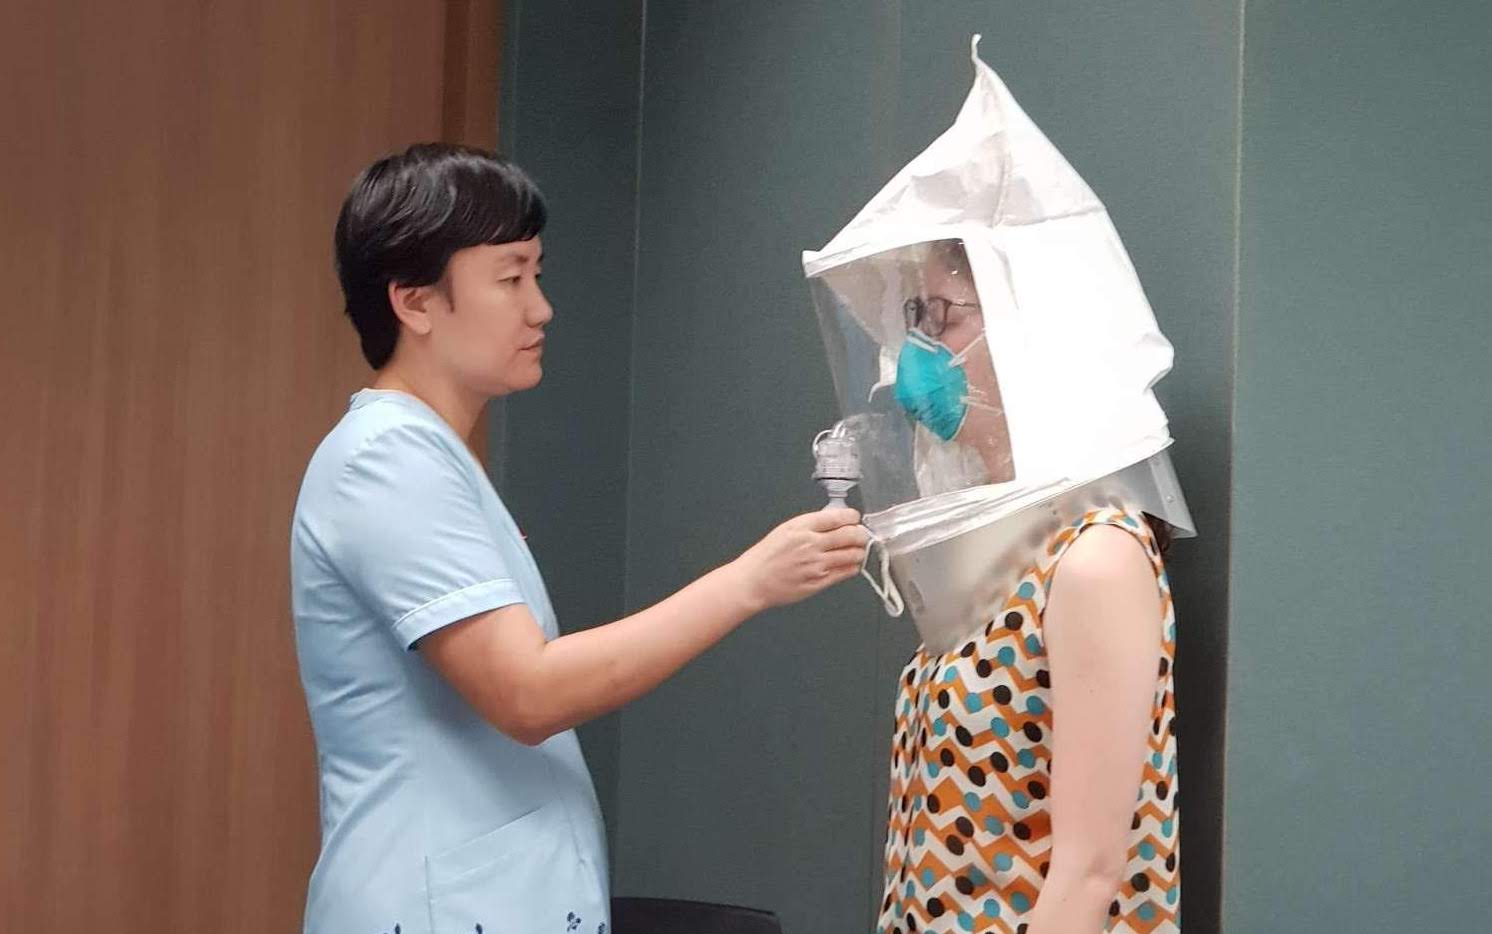 Two women stand facing each other. One women administers a spray to the other which wears an enclosed bonnet and N95 mask, to ensure proper fitting of N95 masks